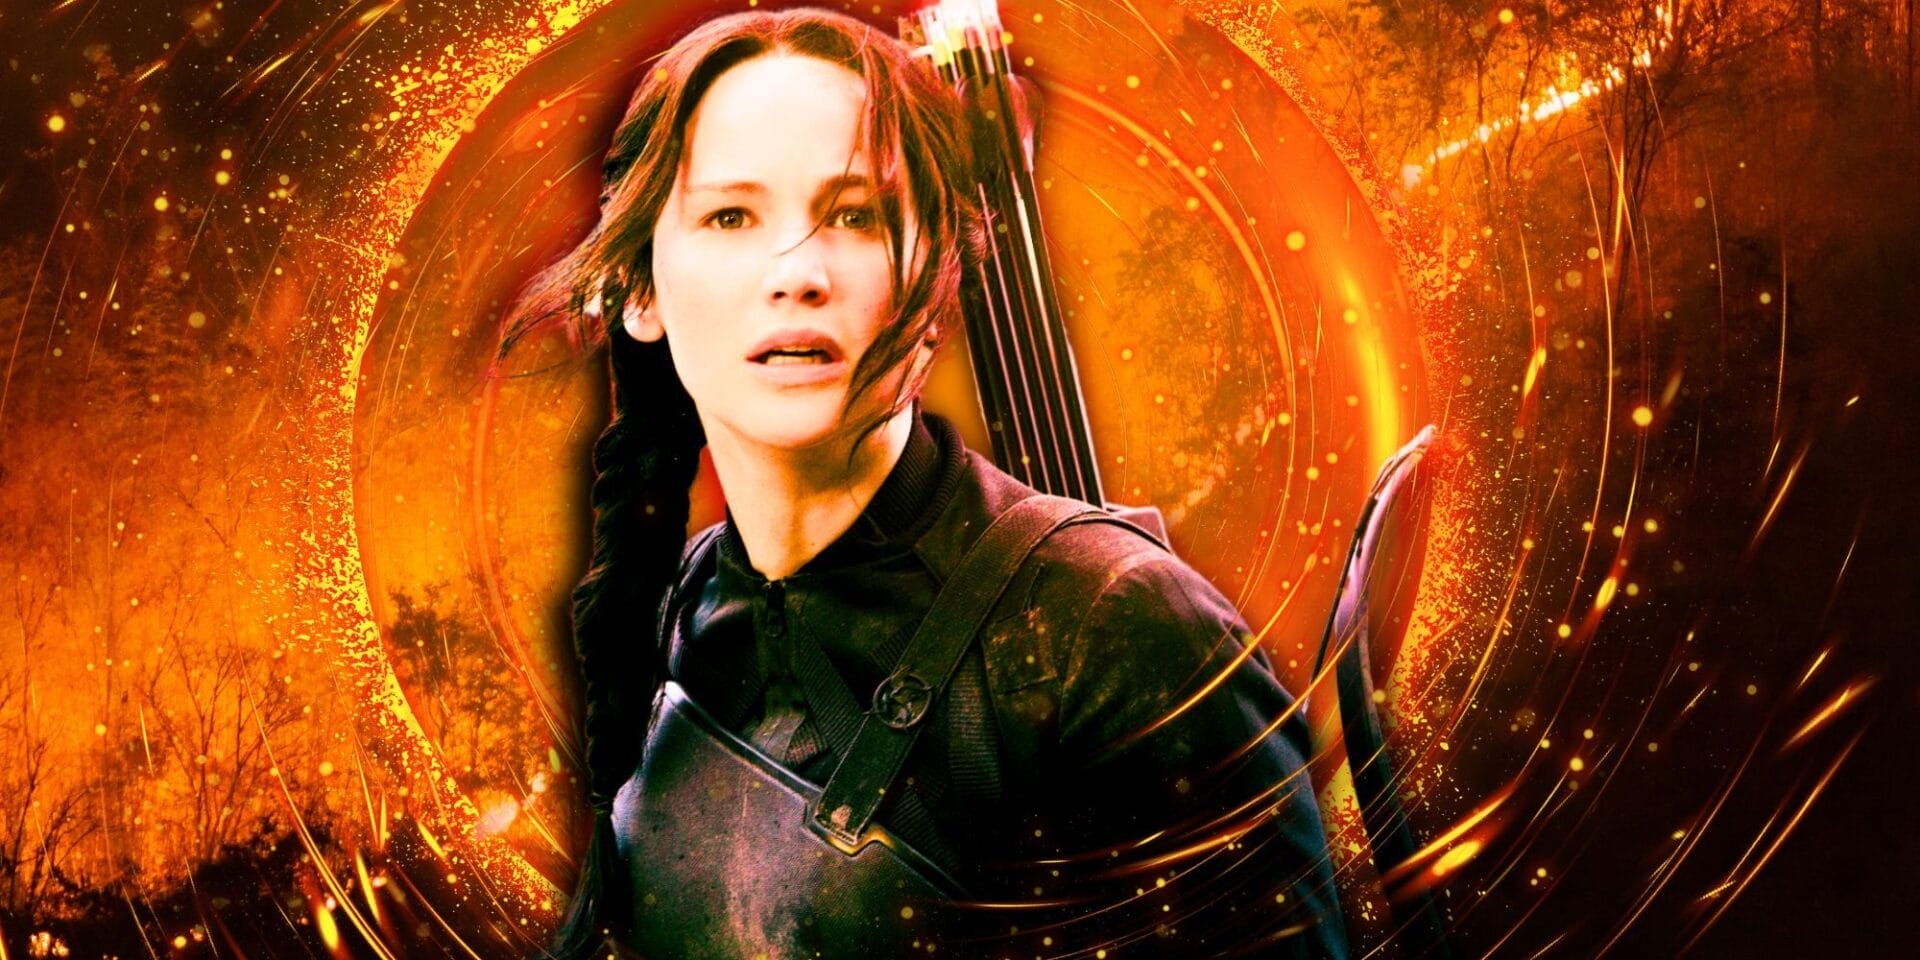 The Odds Of Hunger Games 5 With Jennifer Lawrence Have Greatly Increased 8 Years After Mockingjay